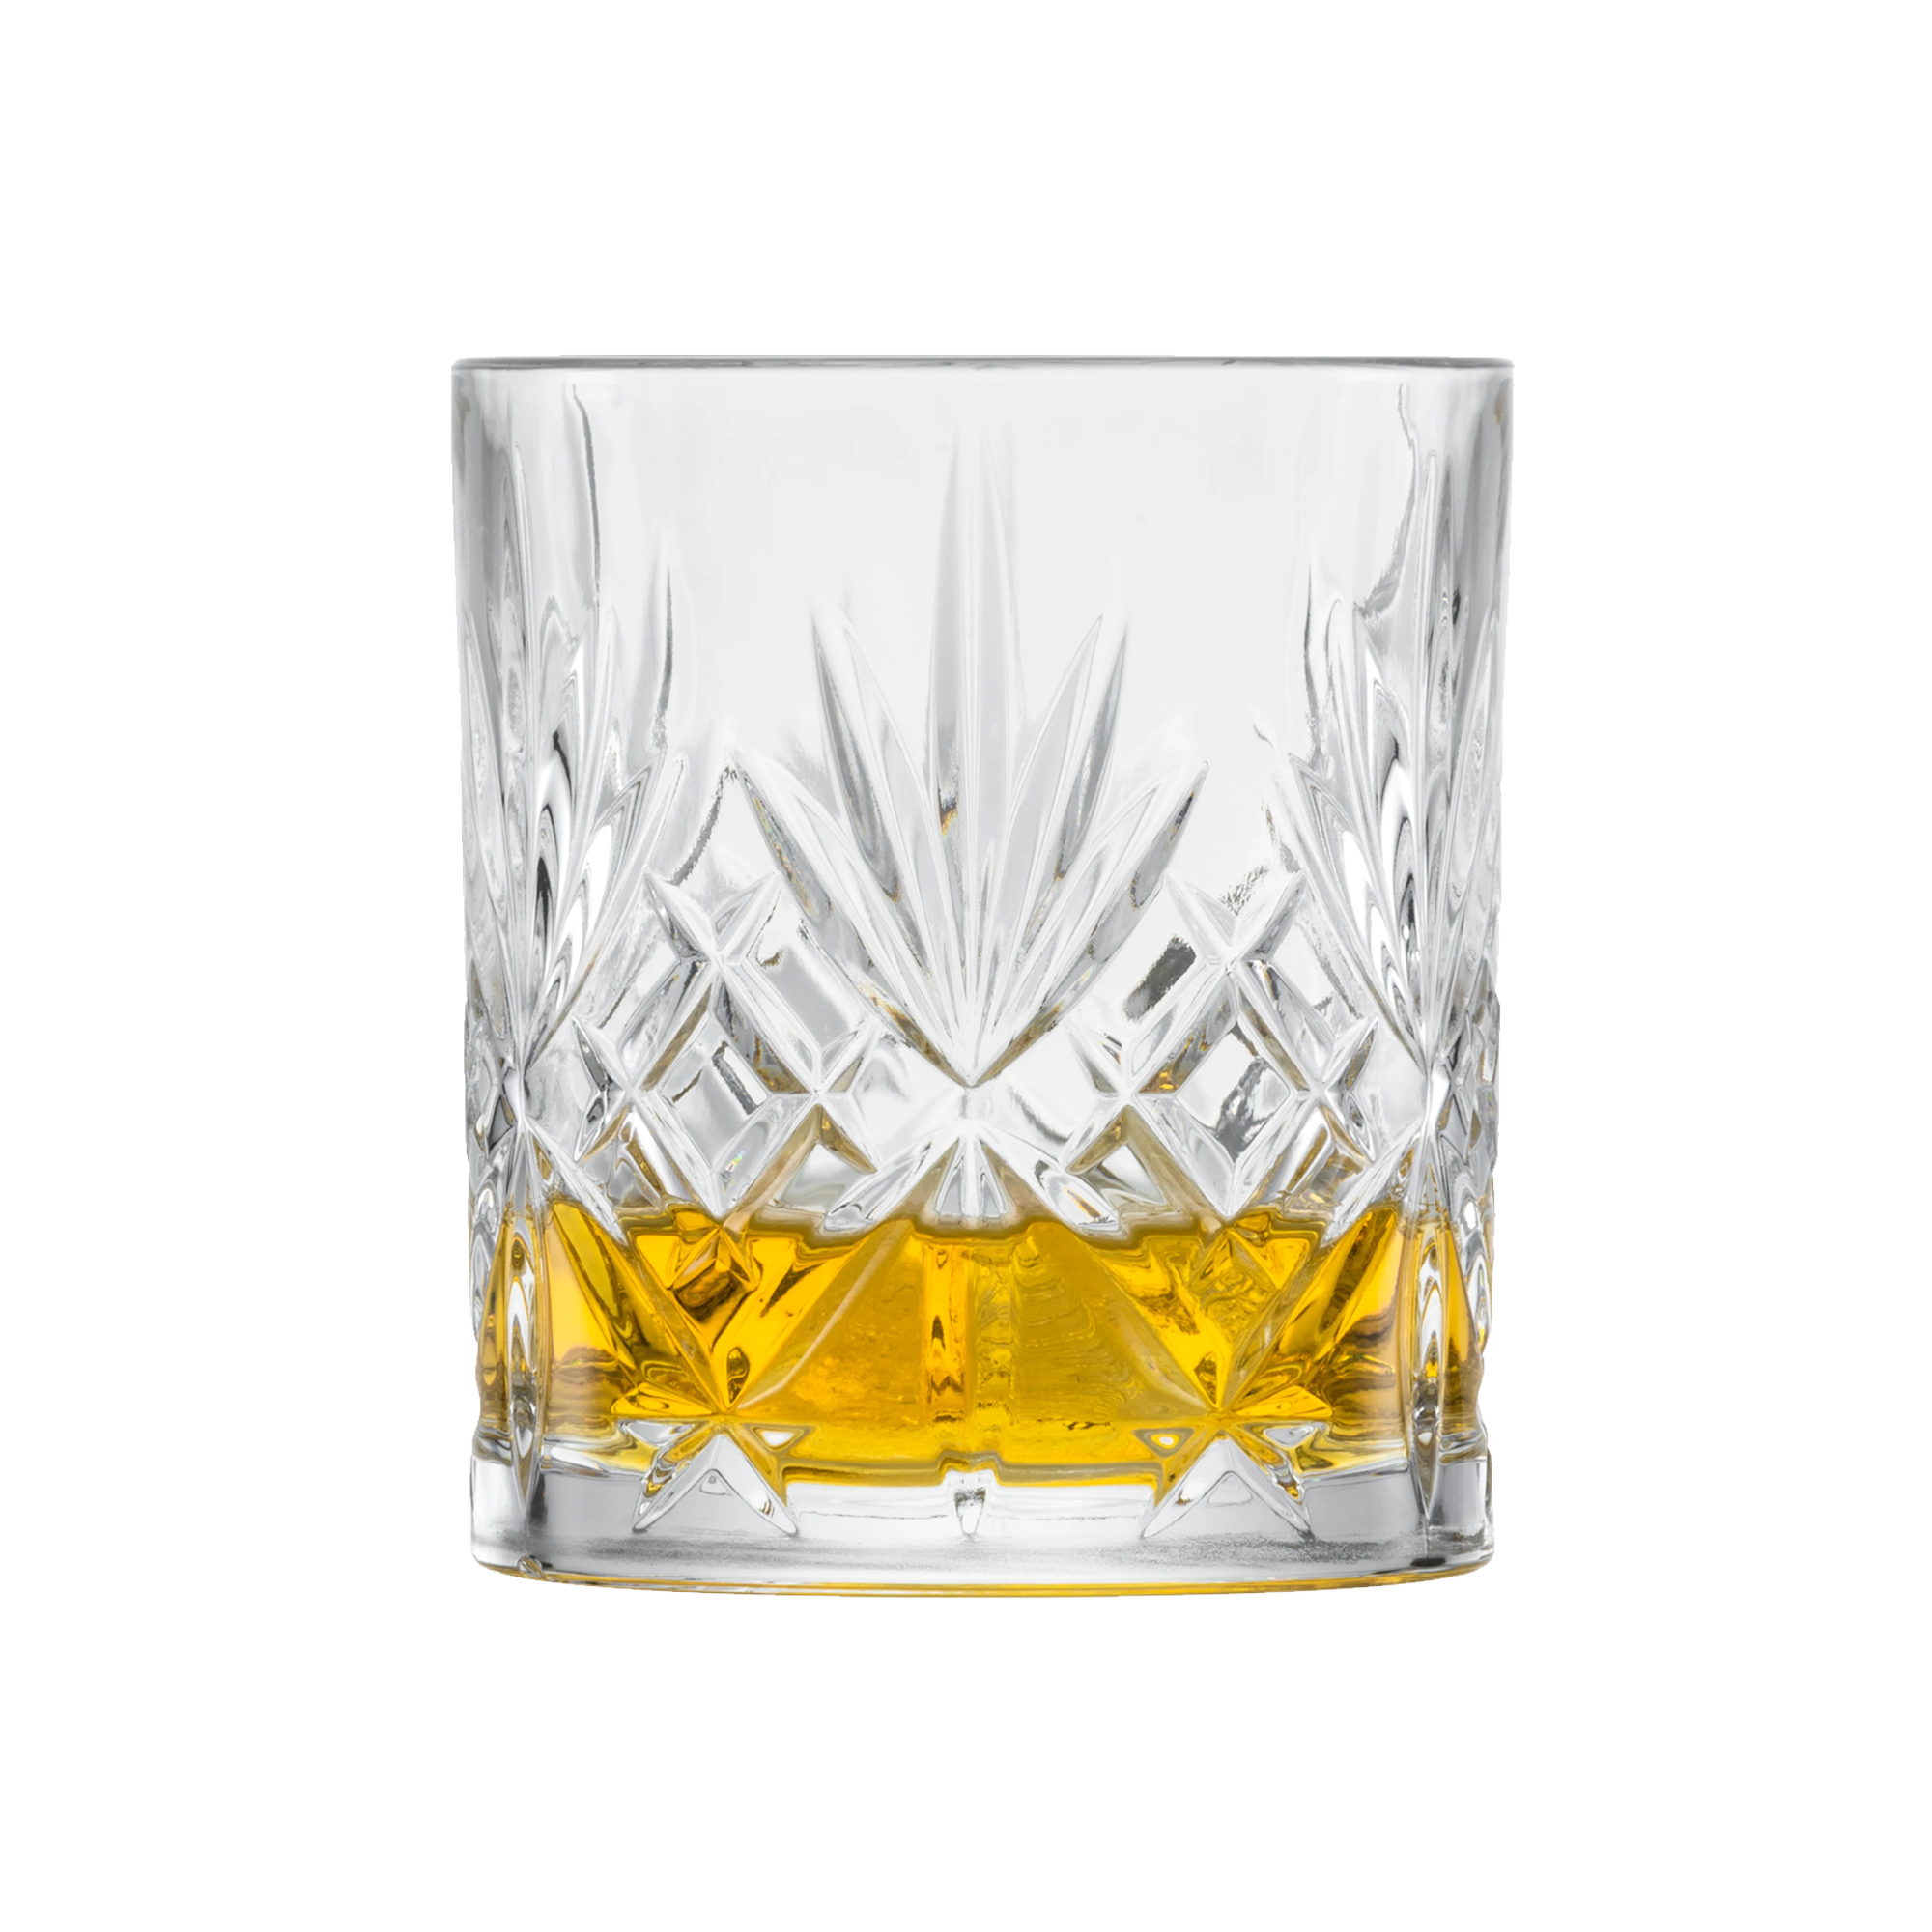 Show Whiskey Glass